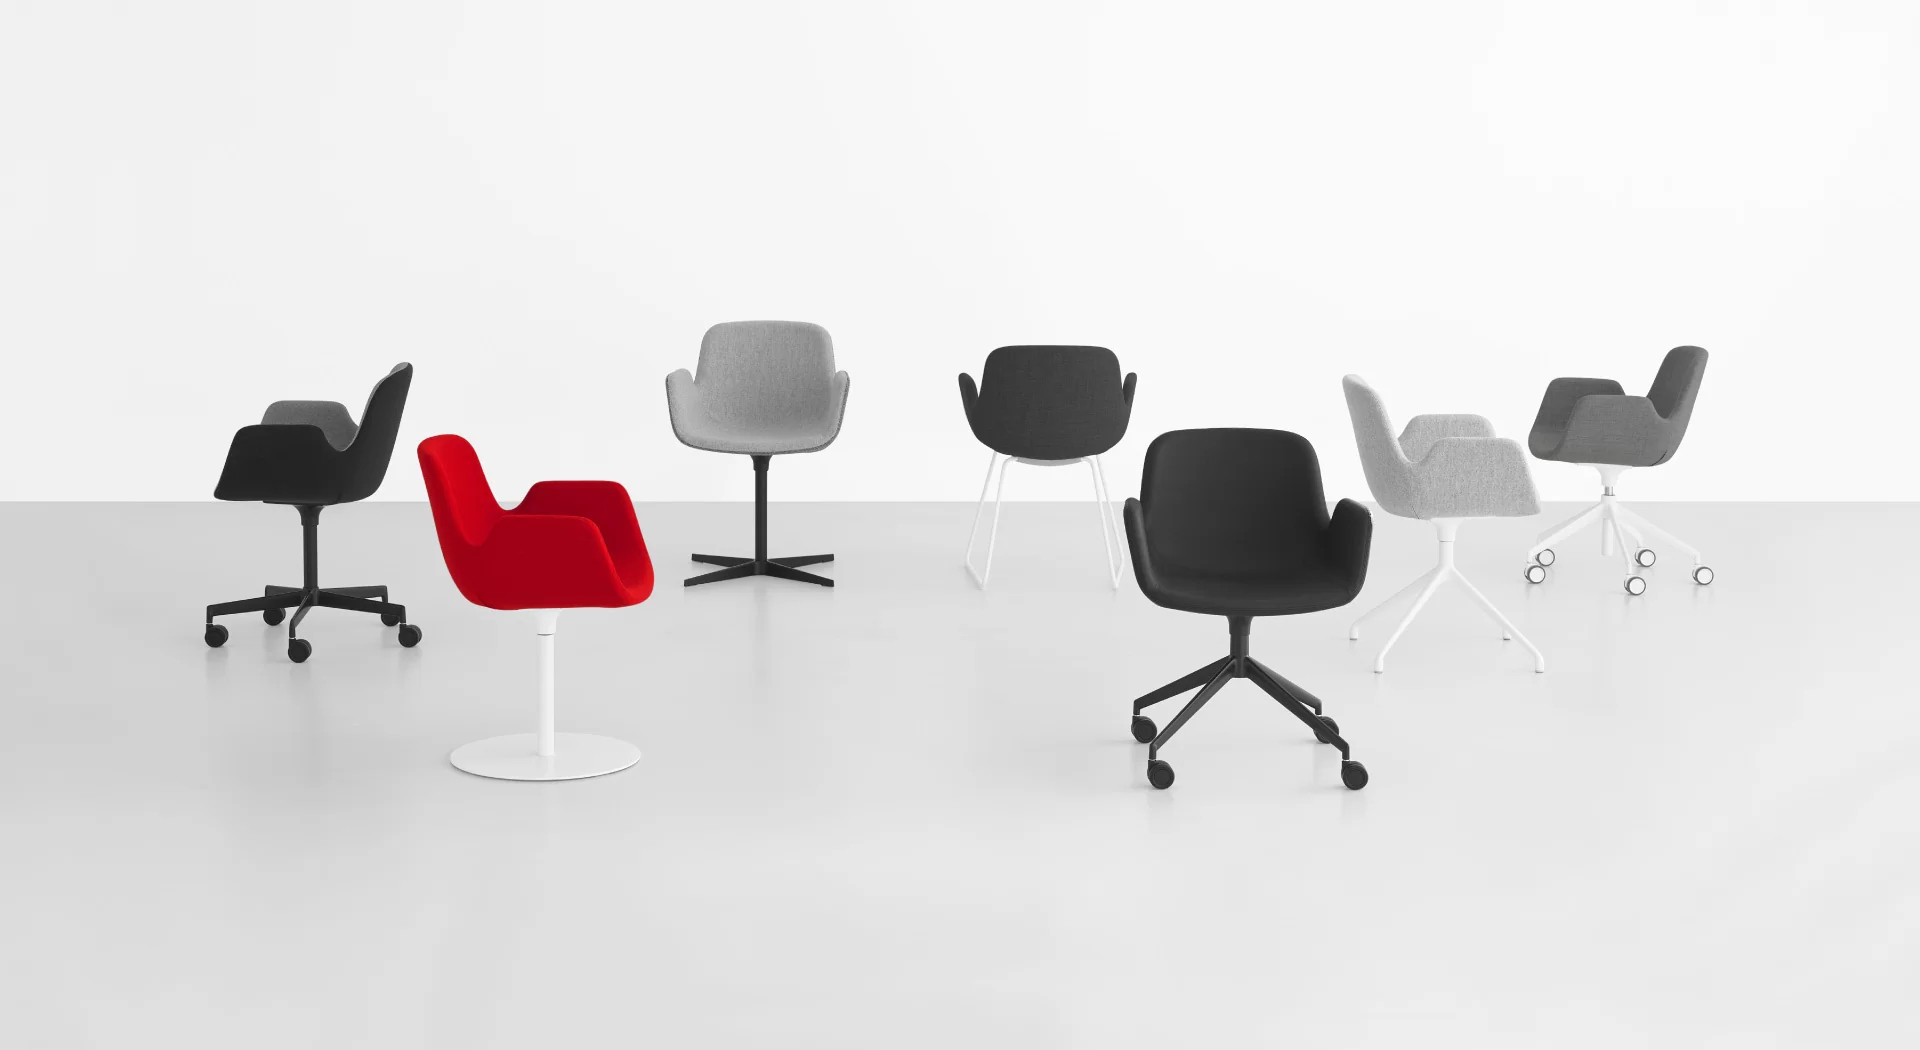 la palma pass seating collection showing different models